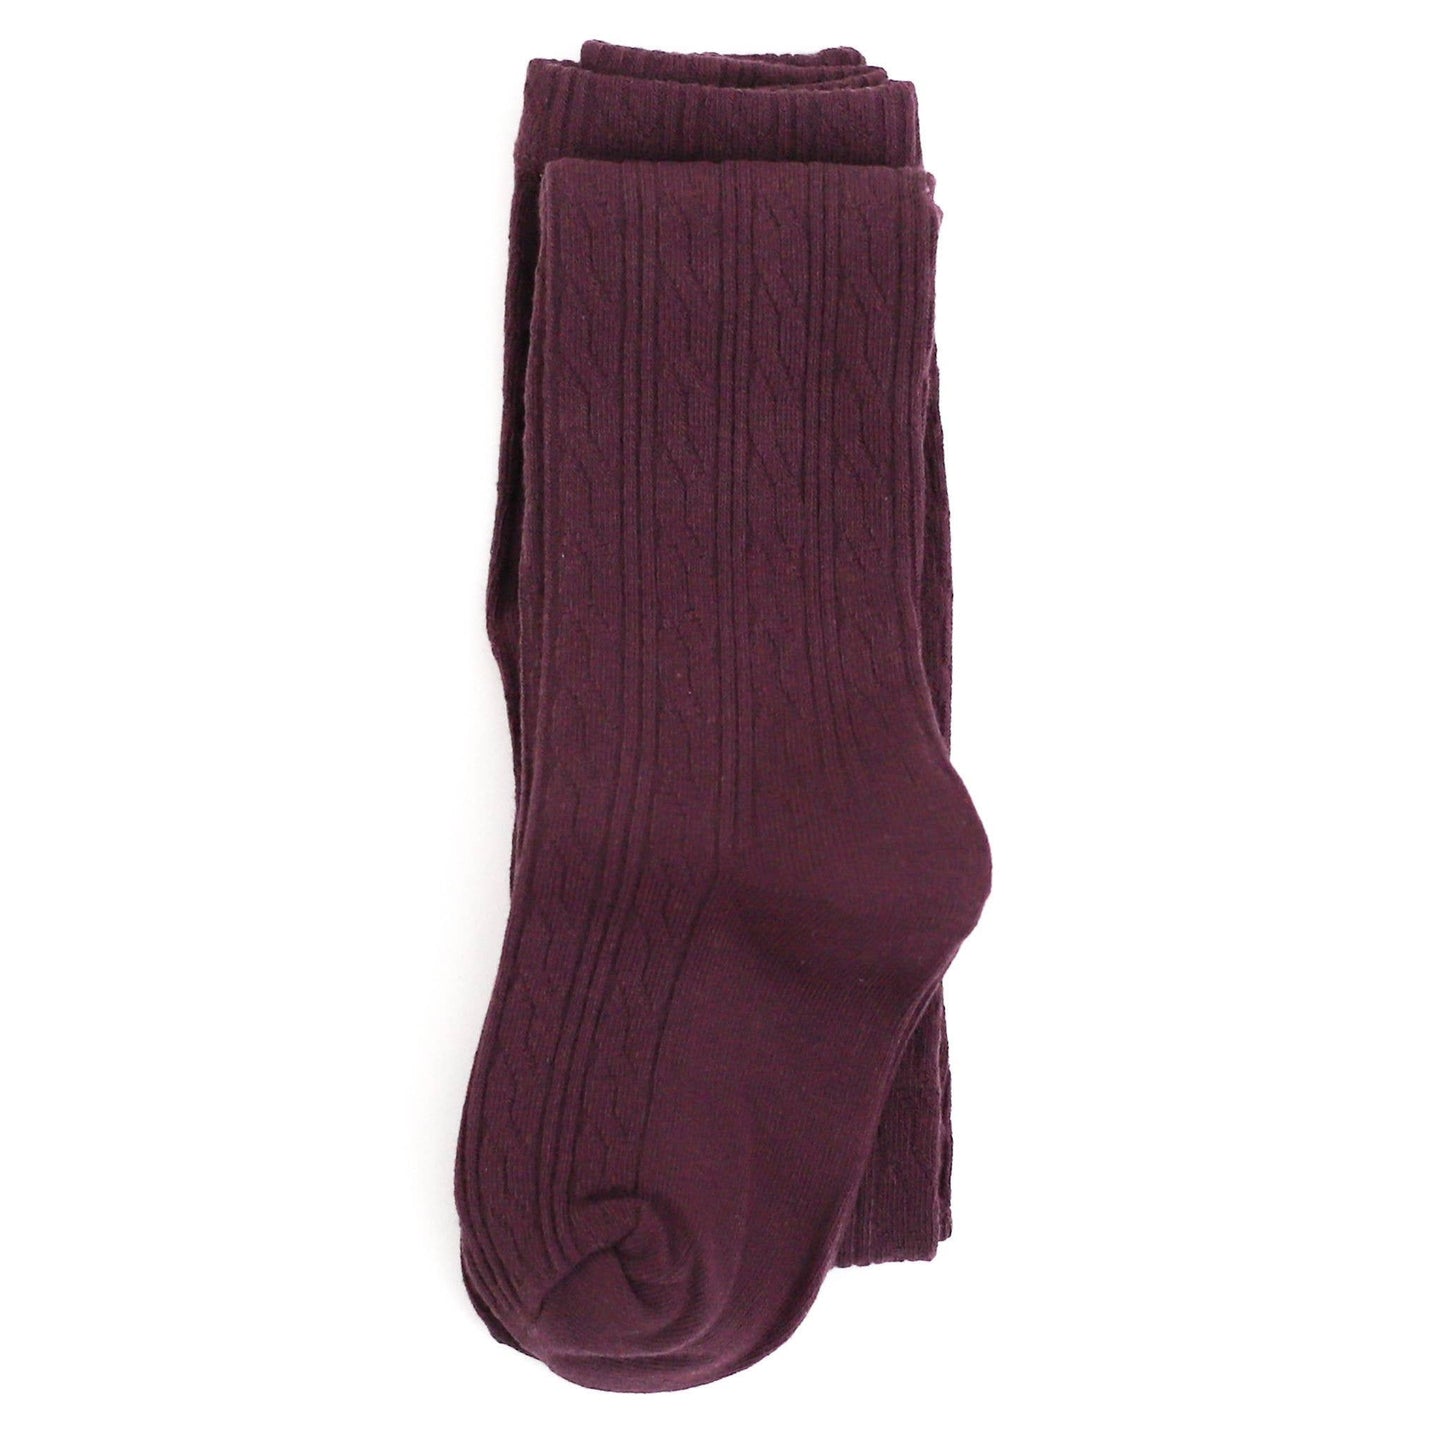 Little Stocking Co. - Plum Cable Knit Tights